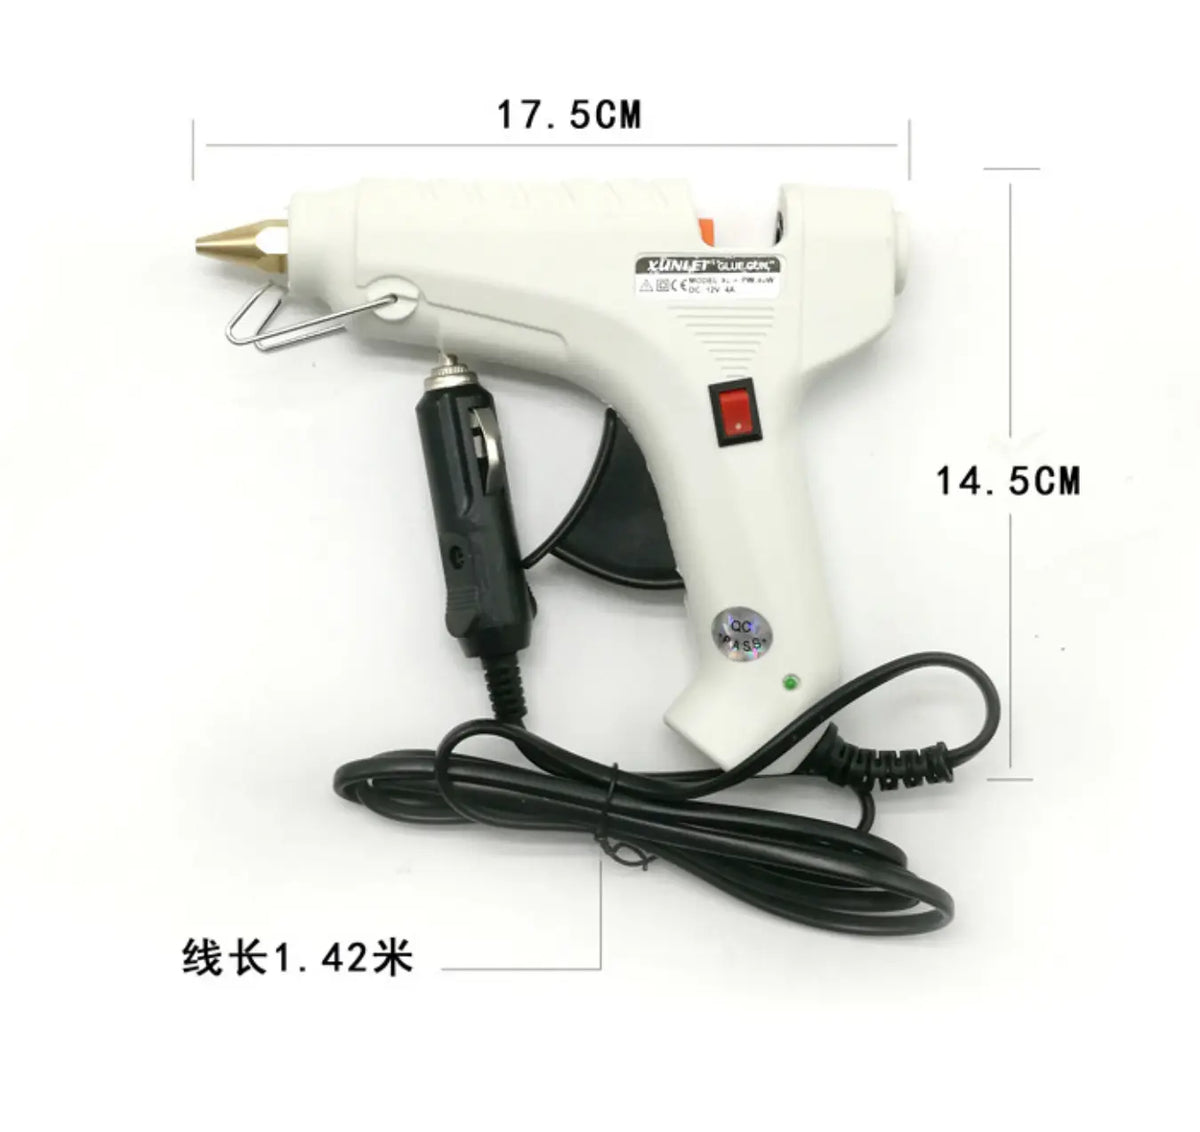 12V 40W Hot Glue Gun for DIY Small Craft Projects and Home Repairs FairTools